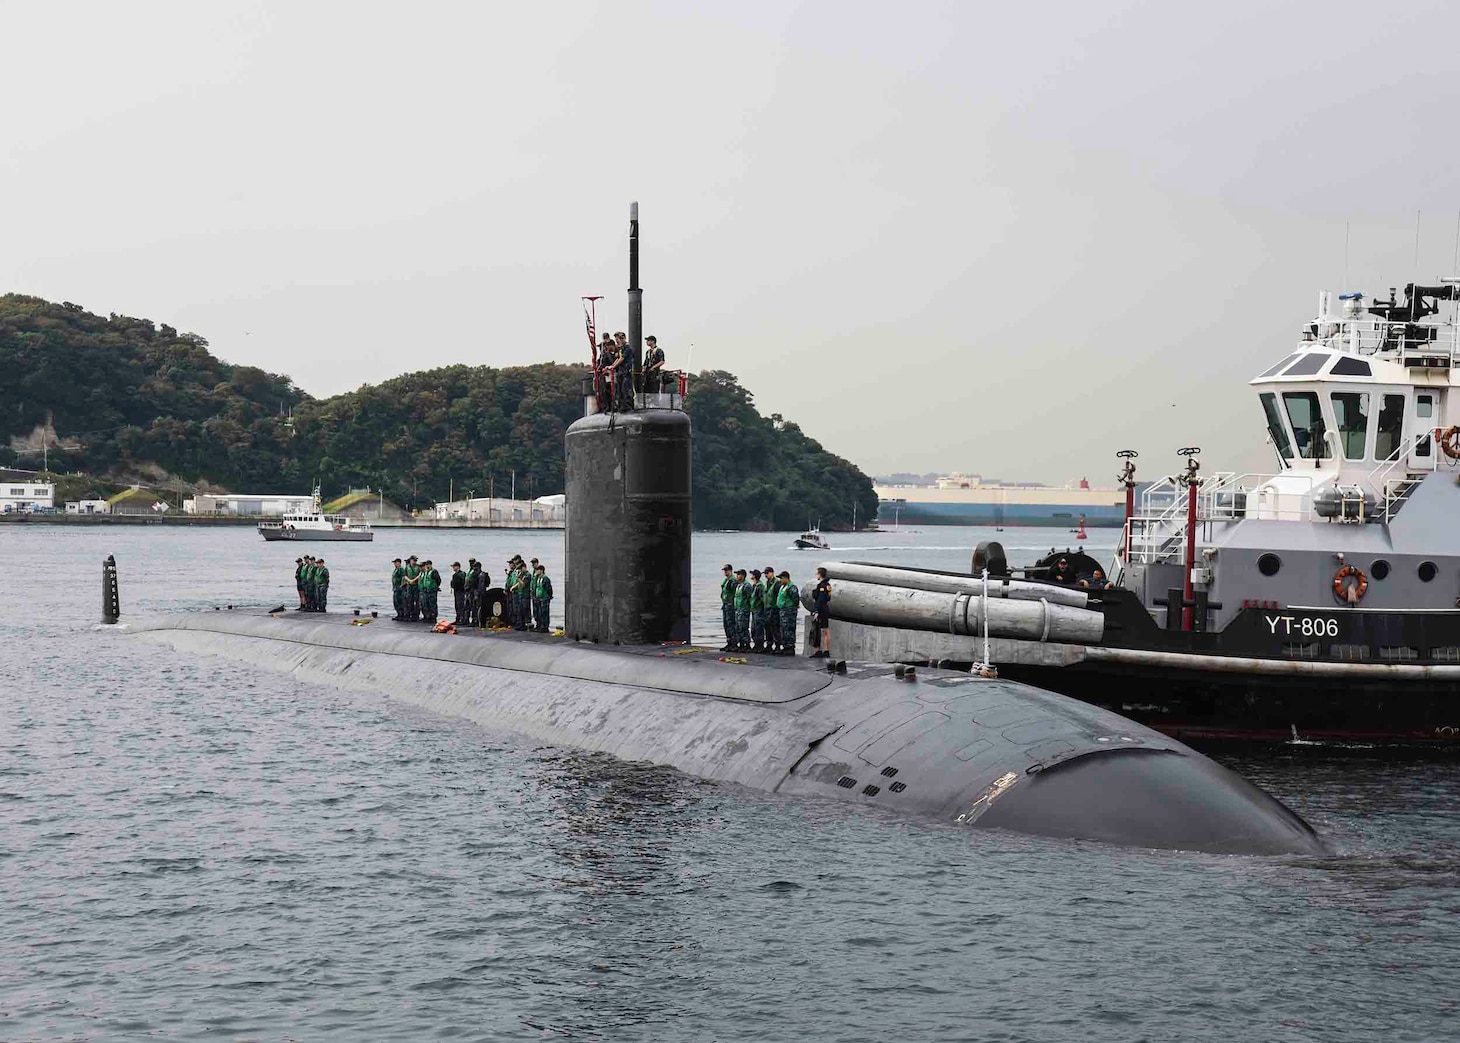 161025-N-ED185-077
TOKYO BAY, Japan (Oct. 25, 2016) - The Los Angeles-class attack submarine USS Columbia (SSN 771) prepares to moor at Fleet Activities Yokosuka. Columbia is visiting Yokosuka for a port visit. U.S. Navy port visits represent an important opportunity to promote stability and security in the Indo-Asia-Pacific region, demonstrate commitment to regional partners and foster relationships. (U.S. Navy photo by Petty Officer 2nd Class Brian G. Reynolds/Released)
